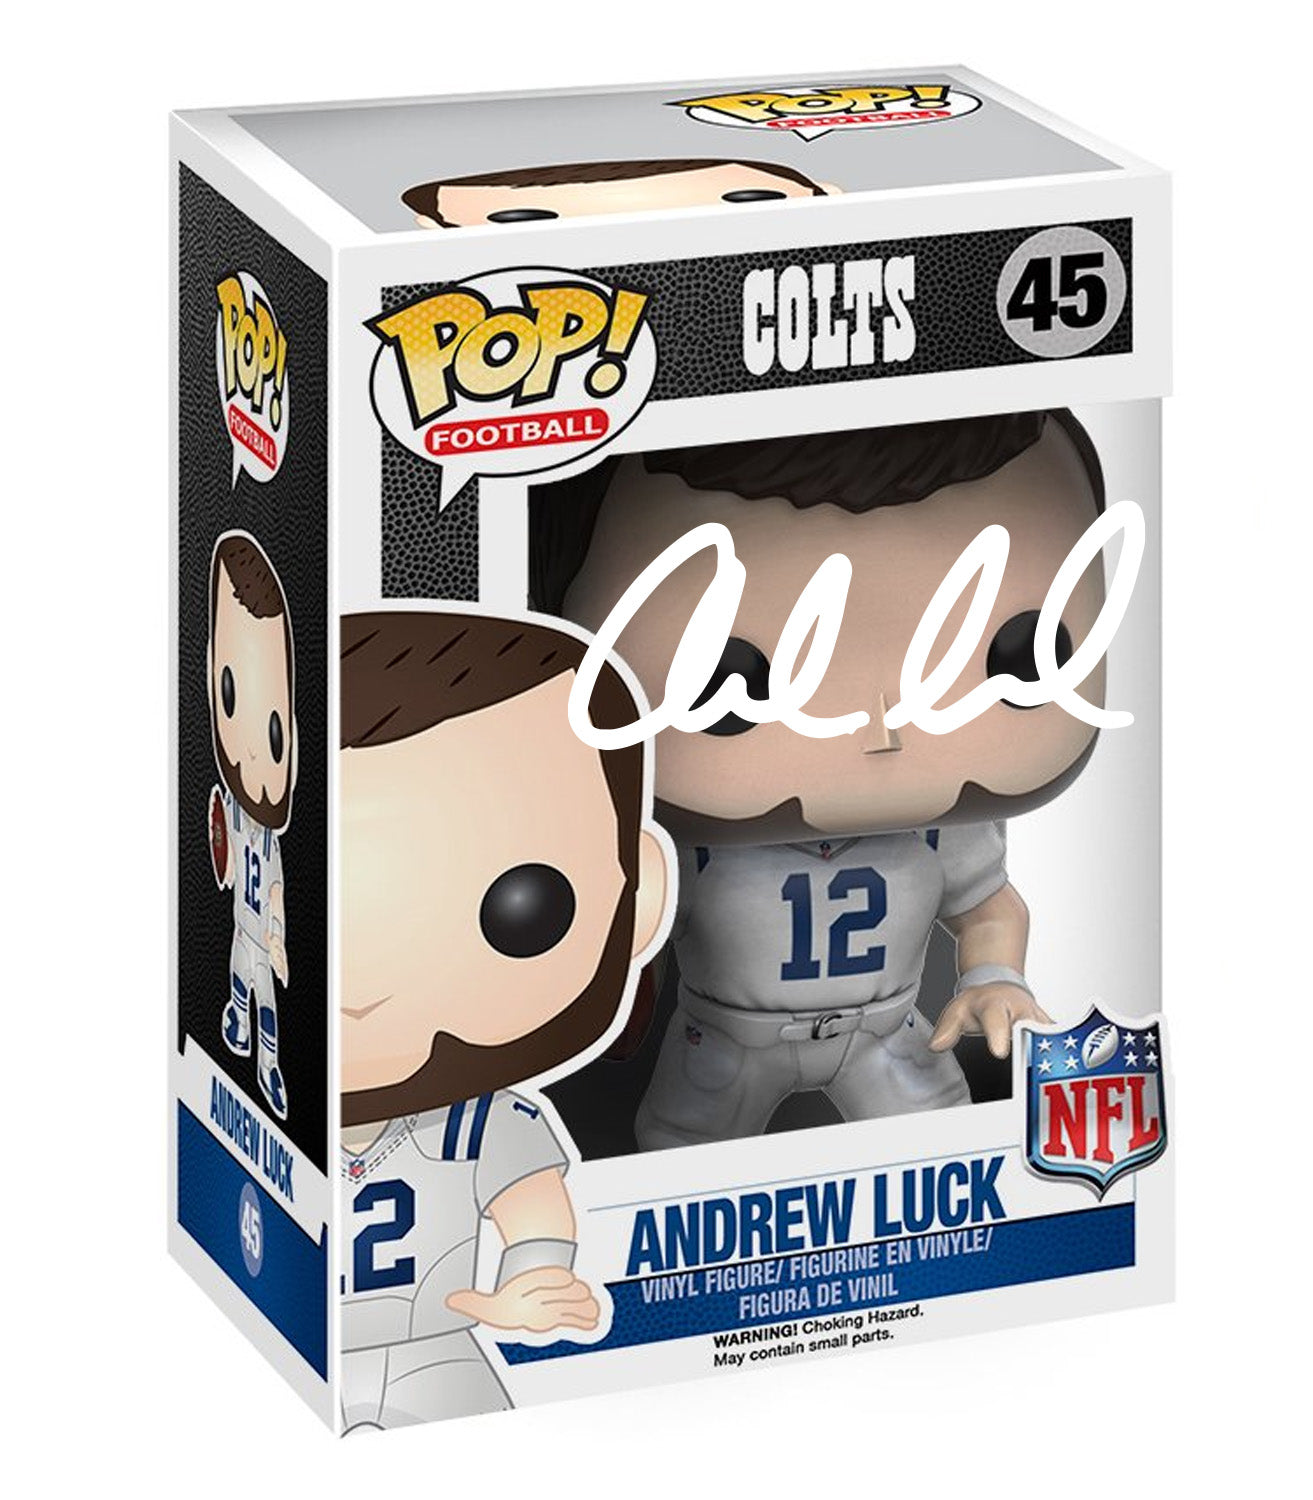 Andrew Luck #45 Facsimile Signed Reprint Laser Autographed Funko POP!  Football NFL: Indianapolis Colts Figurine with Protector Case - Hall of  Fame Sports Memorabilia